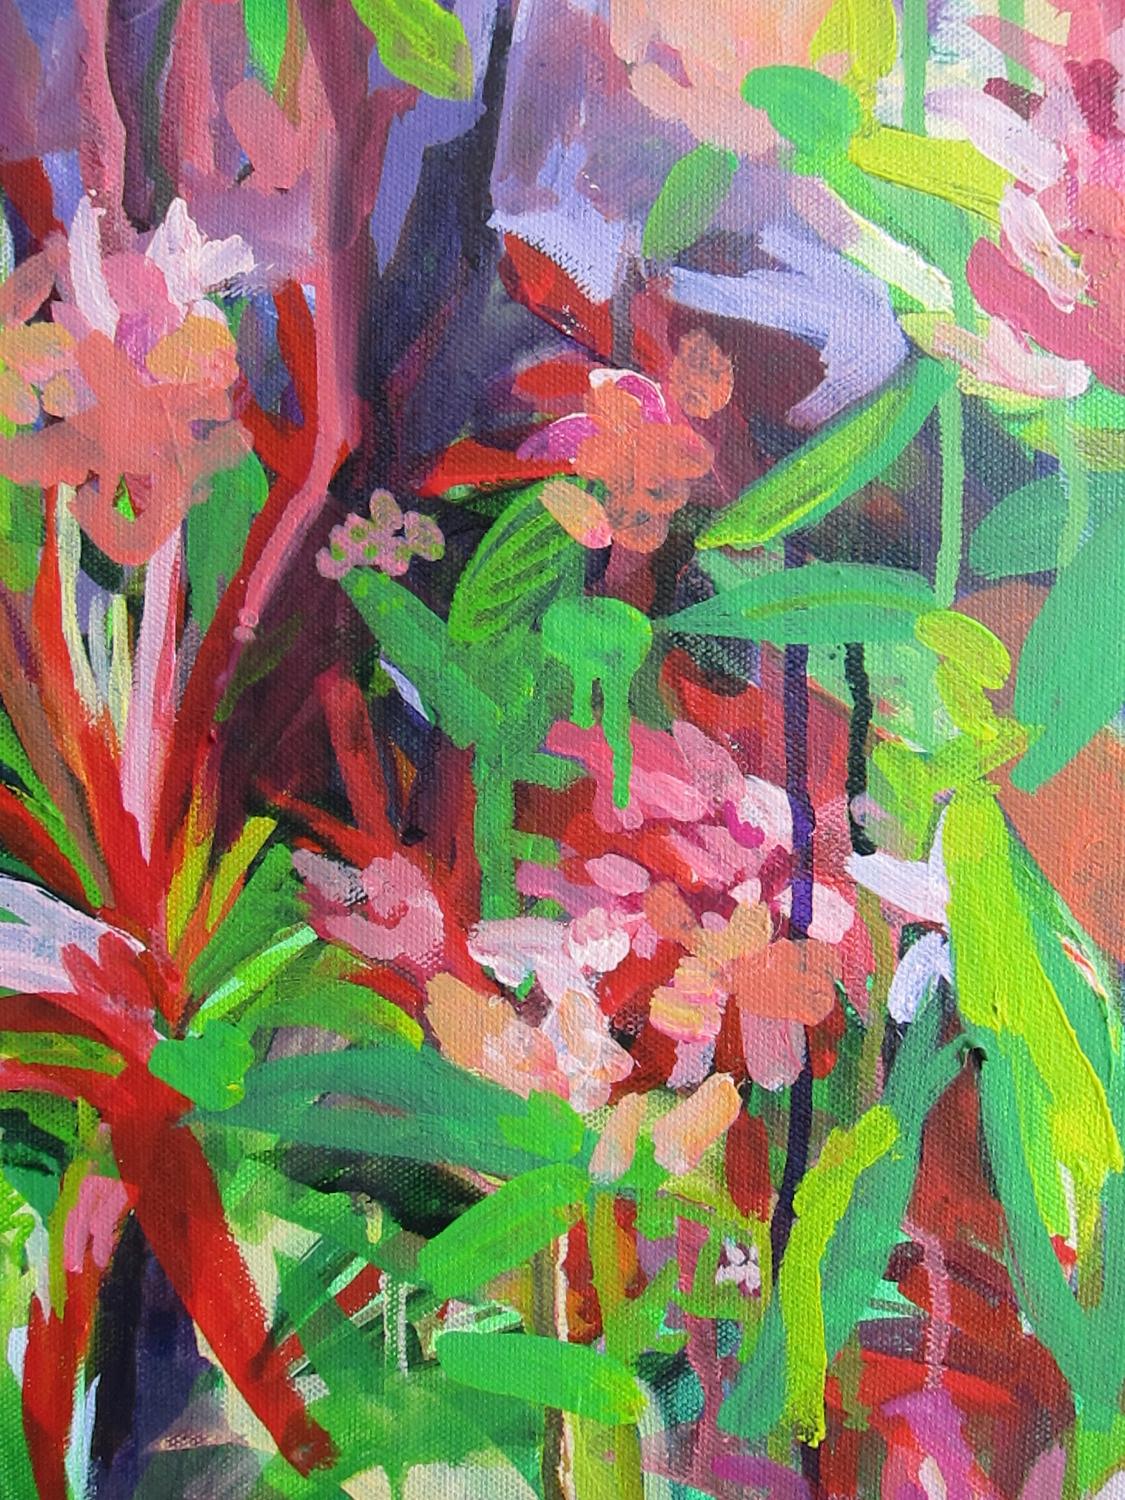 <p>Artist Comments<br />Inspired by the wonderful chaos of nature, artist Colette Wirz Nauke paints this floral abstraction in vivid greens, bright pinks, and deep purple. She captures nature's dynamic character with organic shapes and various